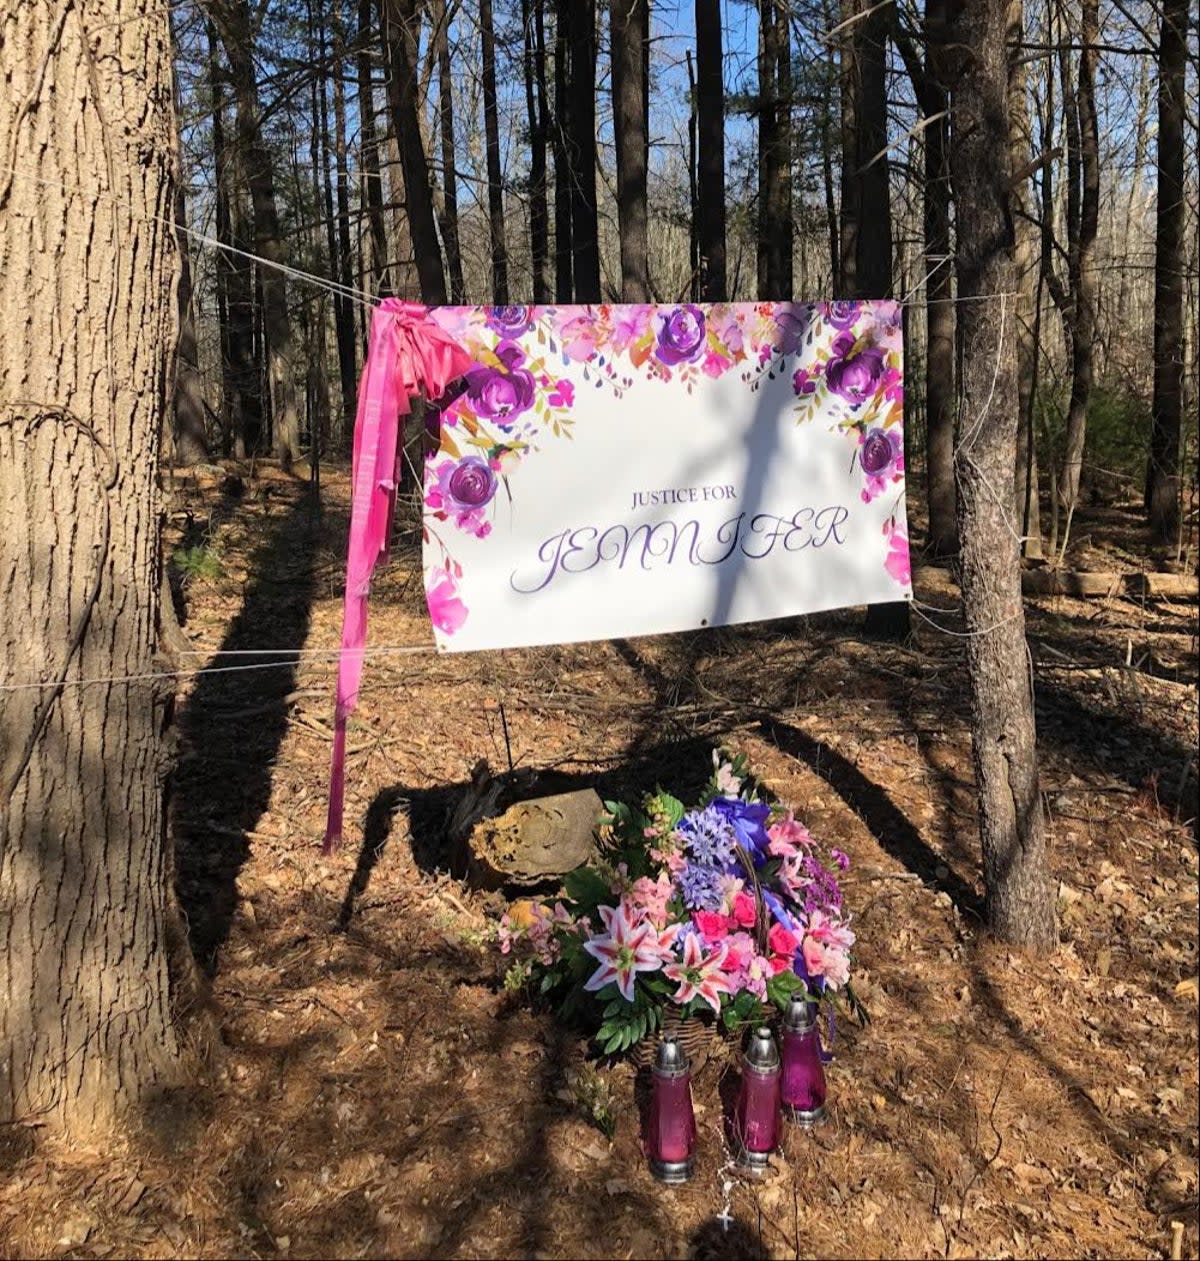 The memorial was set up in February 2020 in West Hartford (Justice for Jennifer Facebook page)